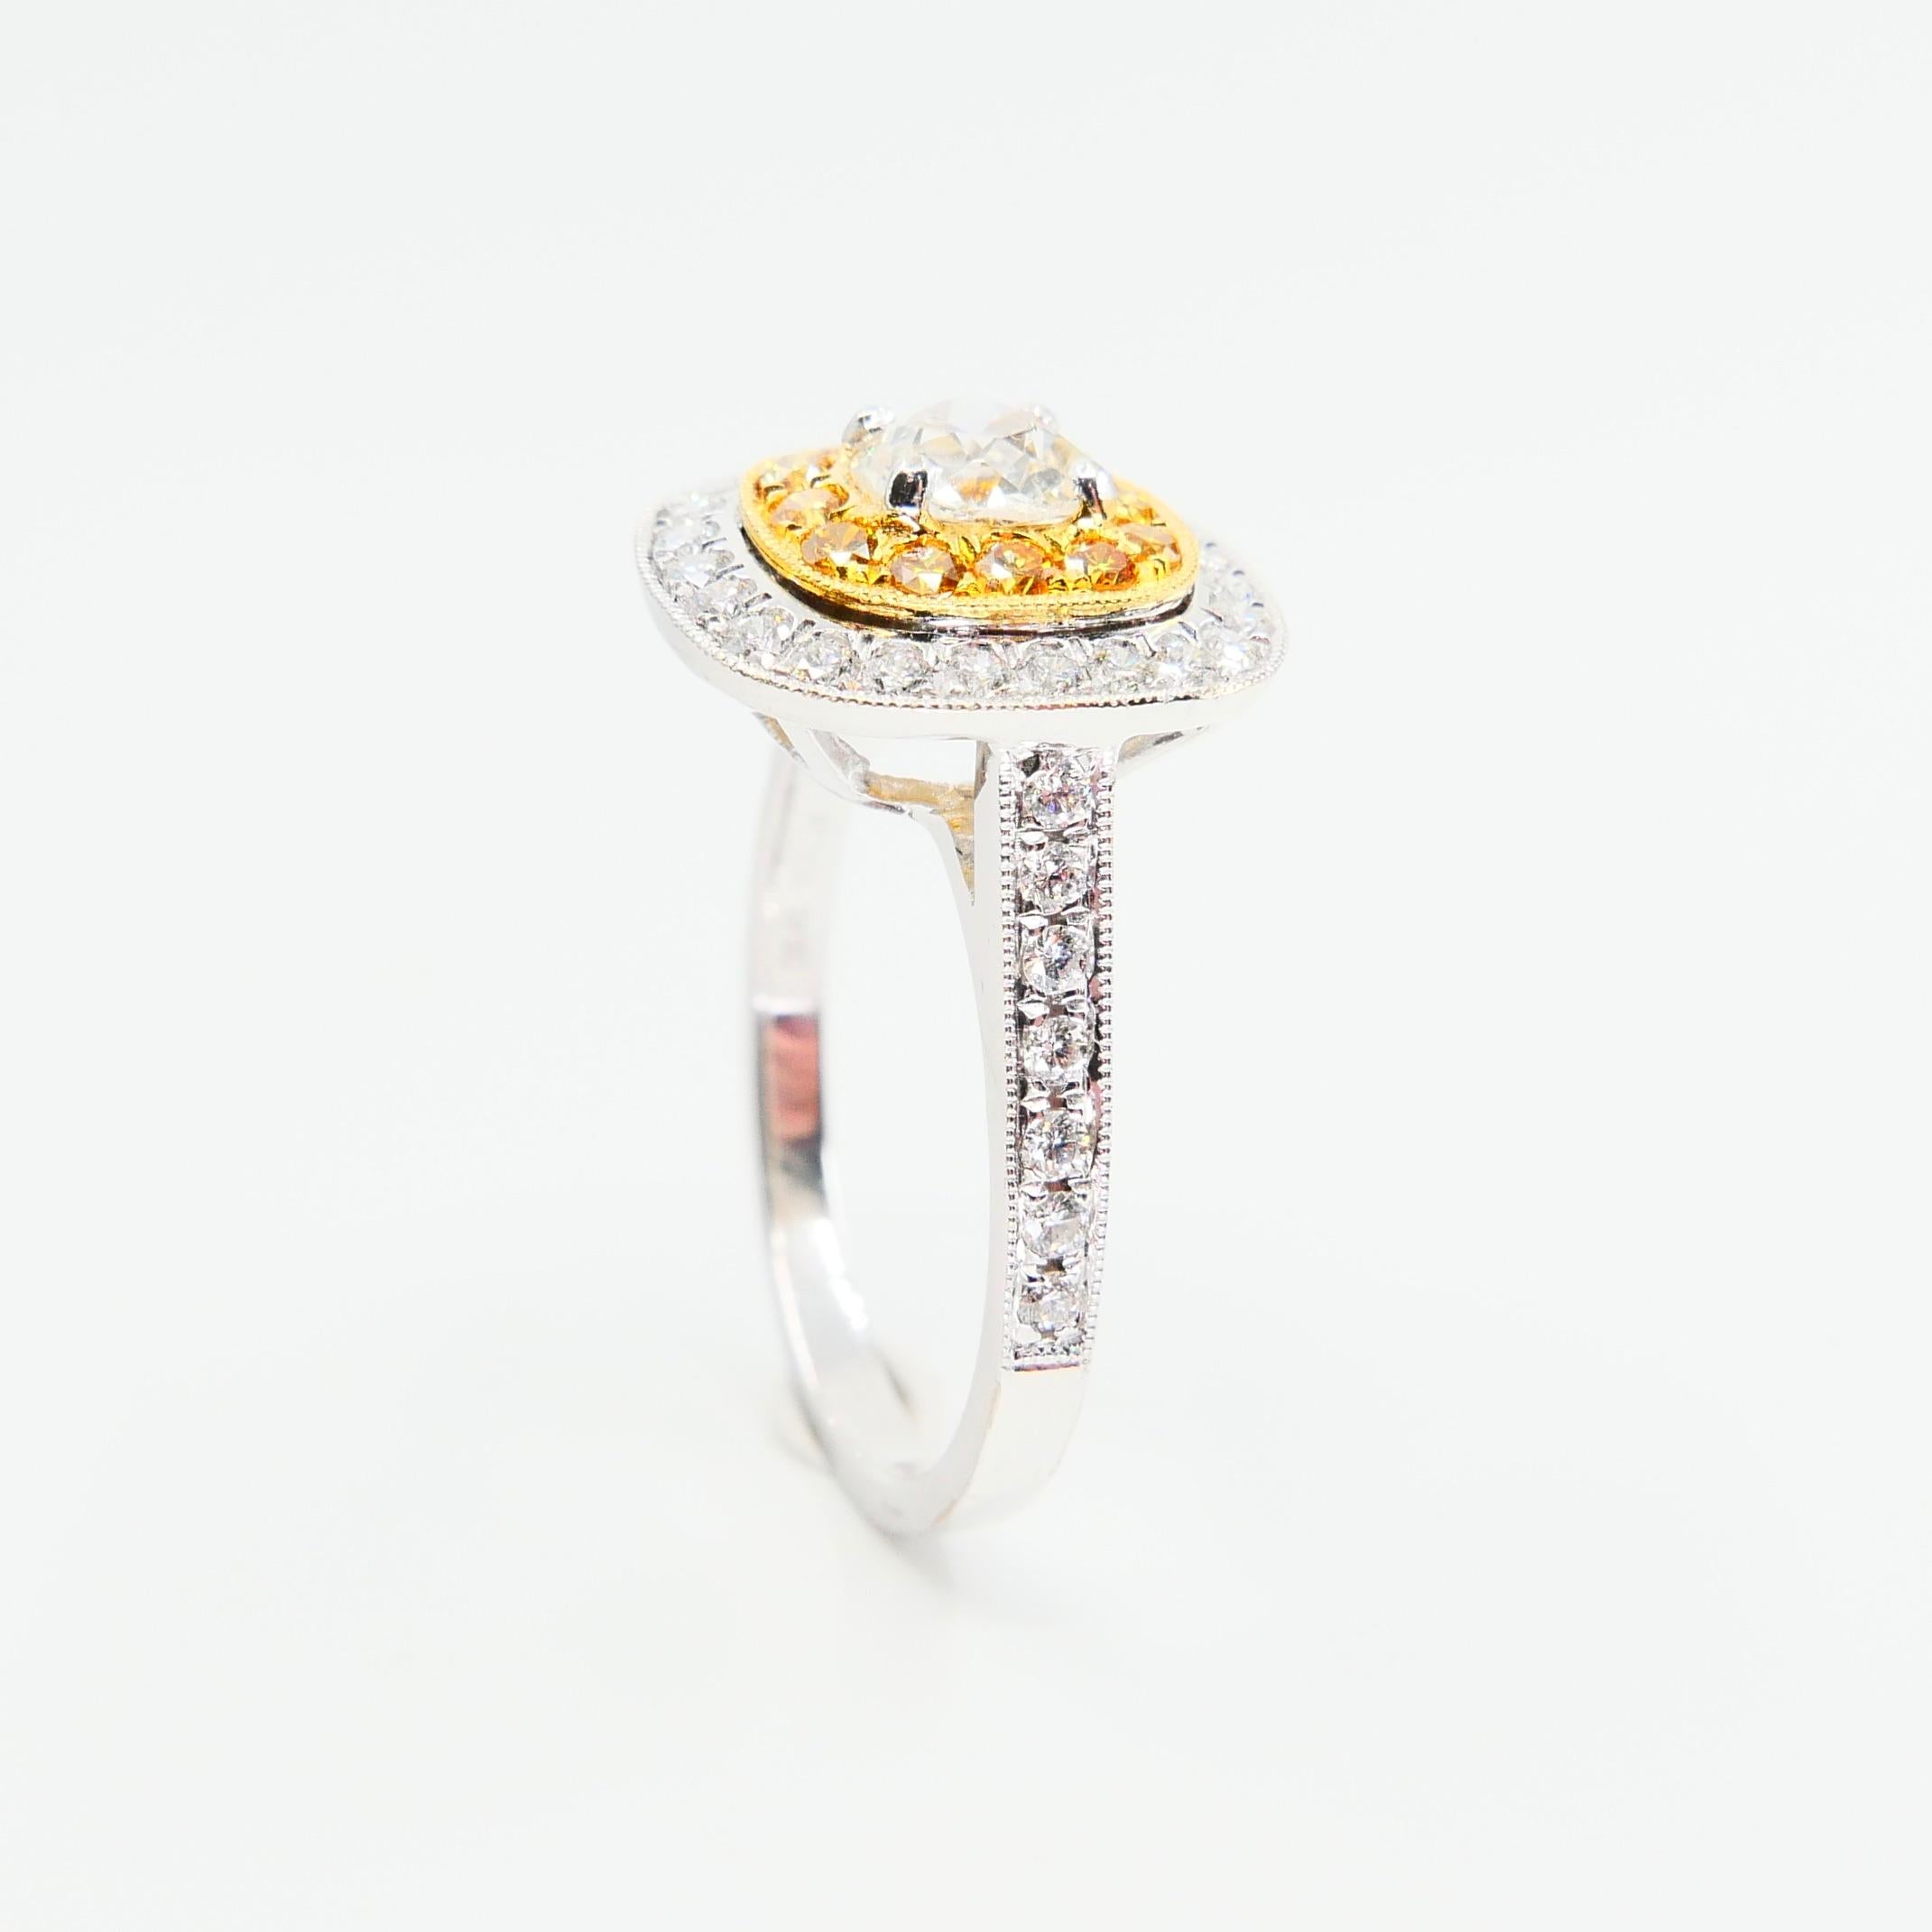 0.54 Cts Old Mine Cut & Fancy Vivid Yellow Diamond Cocktail Ring, 18K White Gold 10